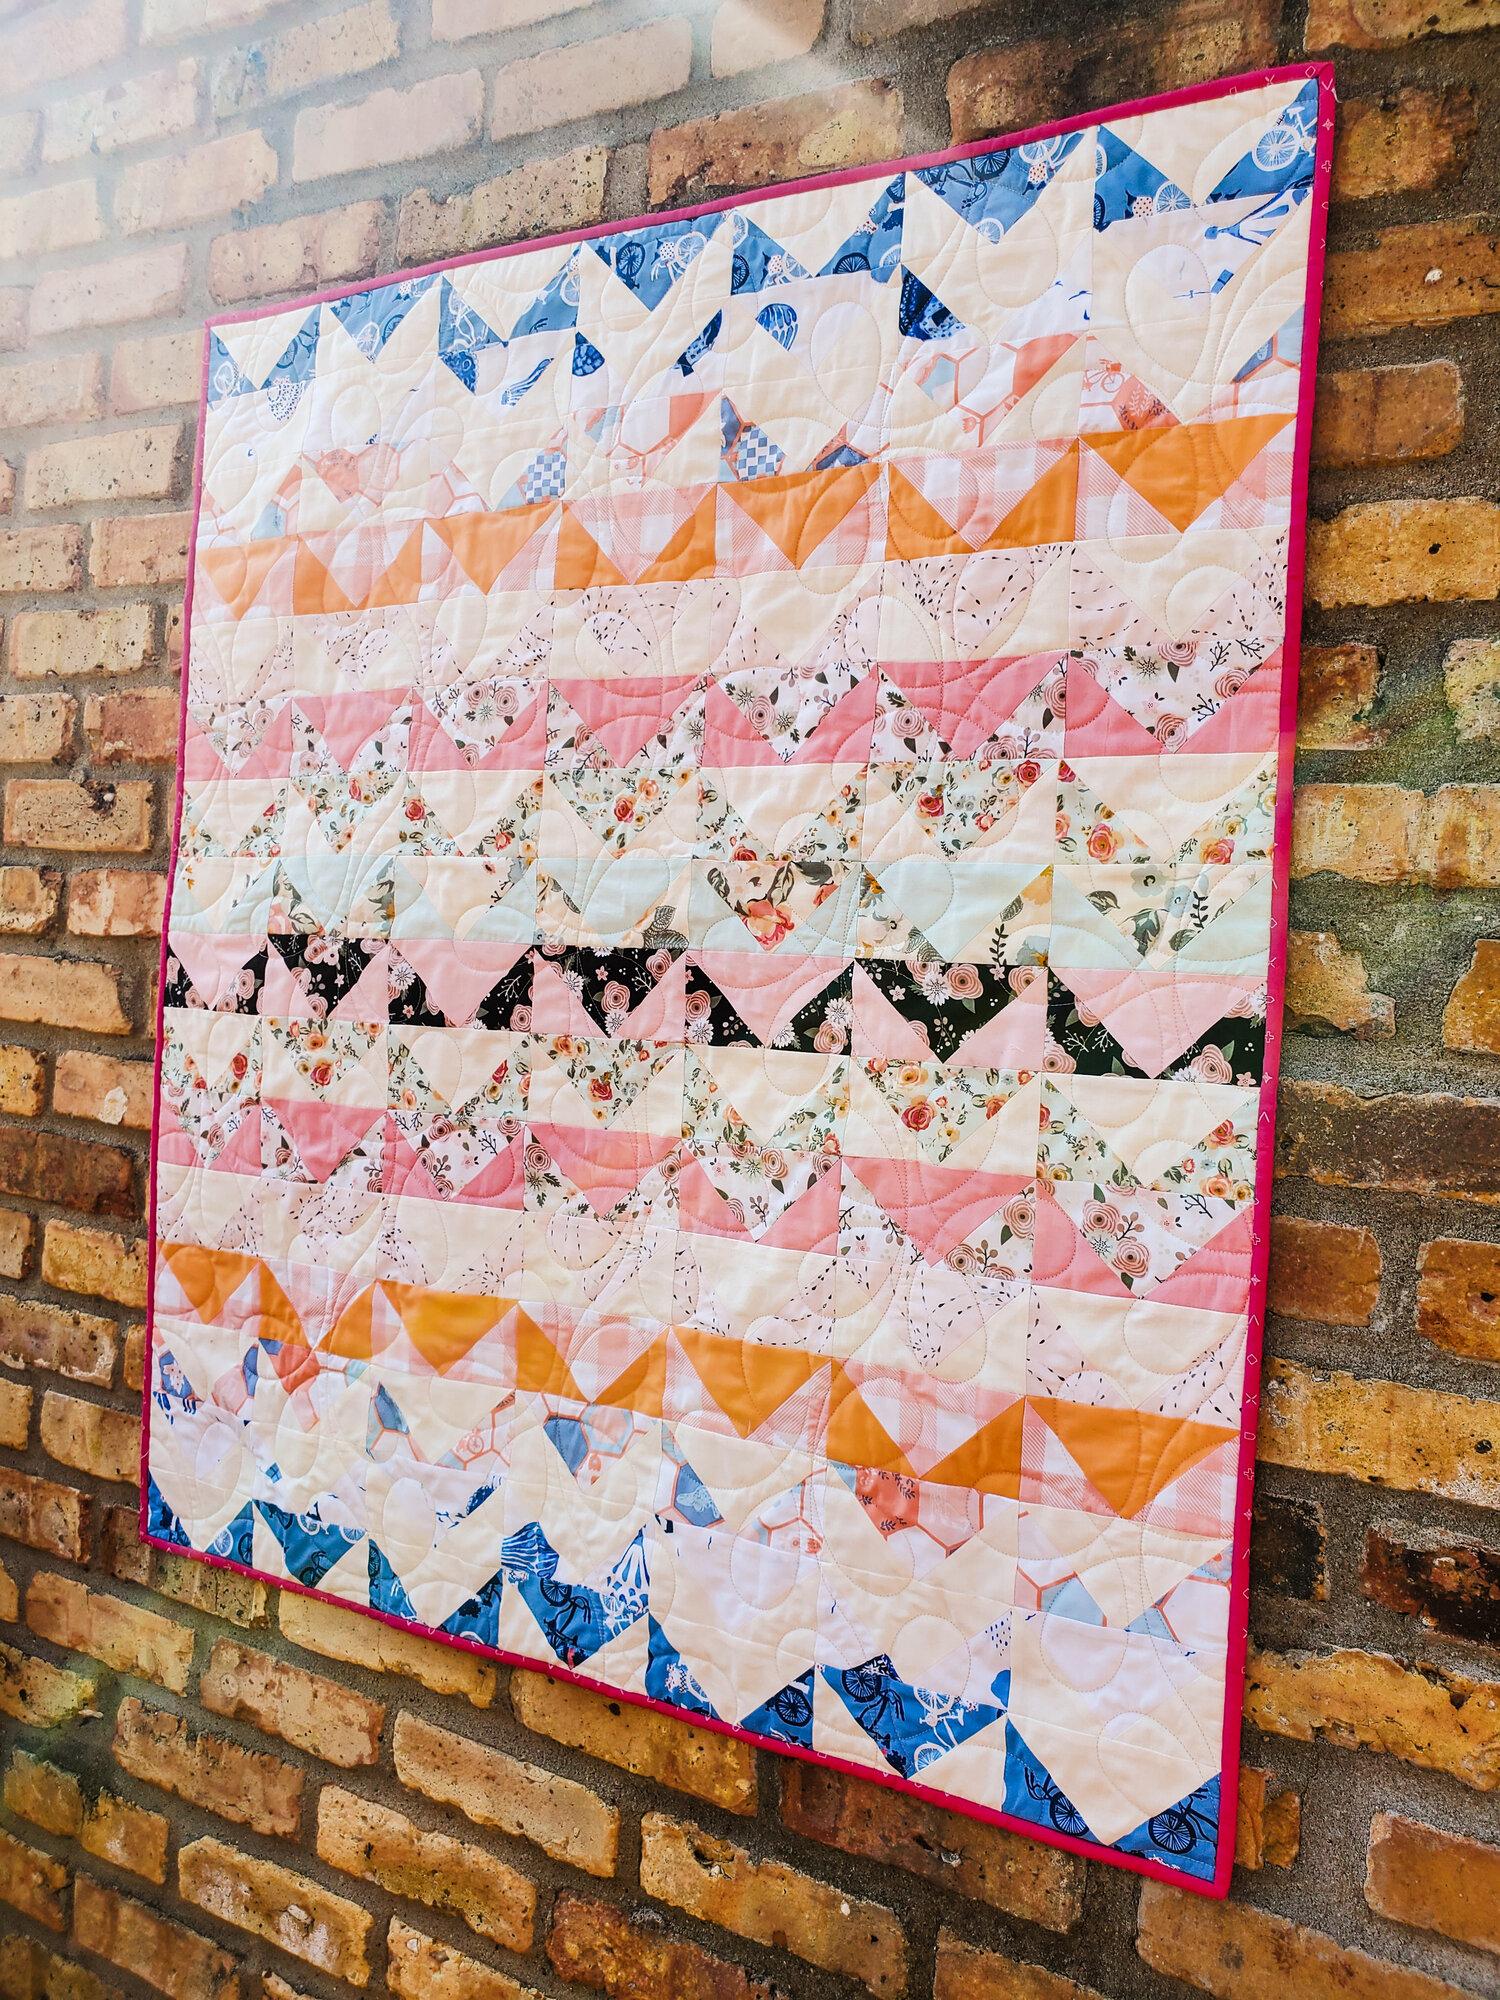 Sandy is so kind and supportive. She is an expert pattern tester and long arm quilter! I love the contrast she created with prints and solids for her quilt. And those dreamy florals, of course! Check out Sandy’s other work on IG @thaicharmllc.